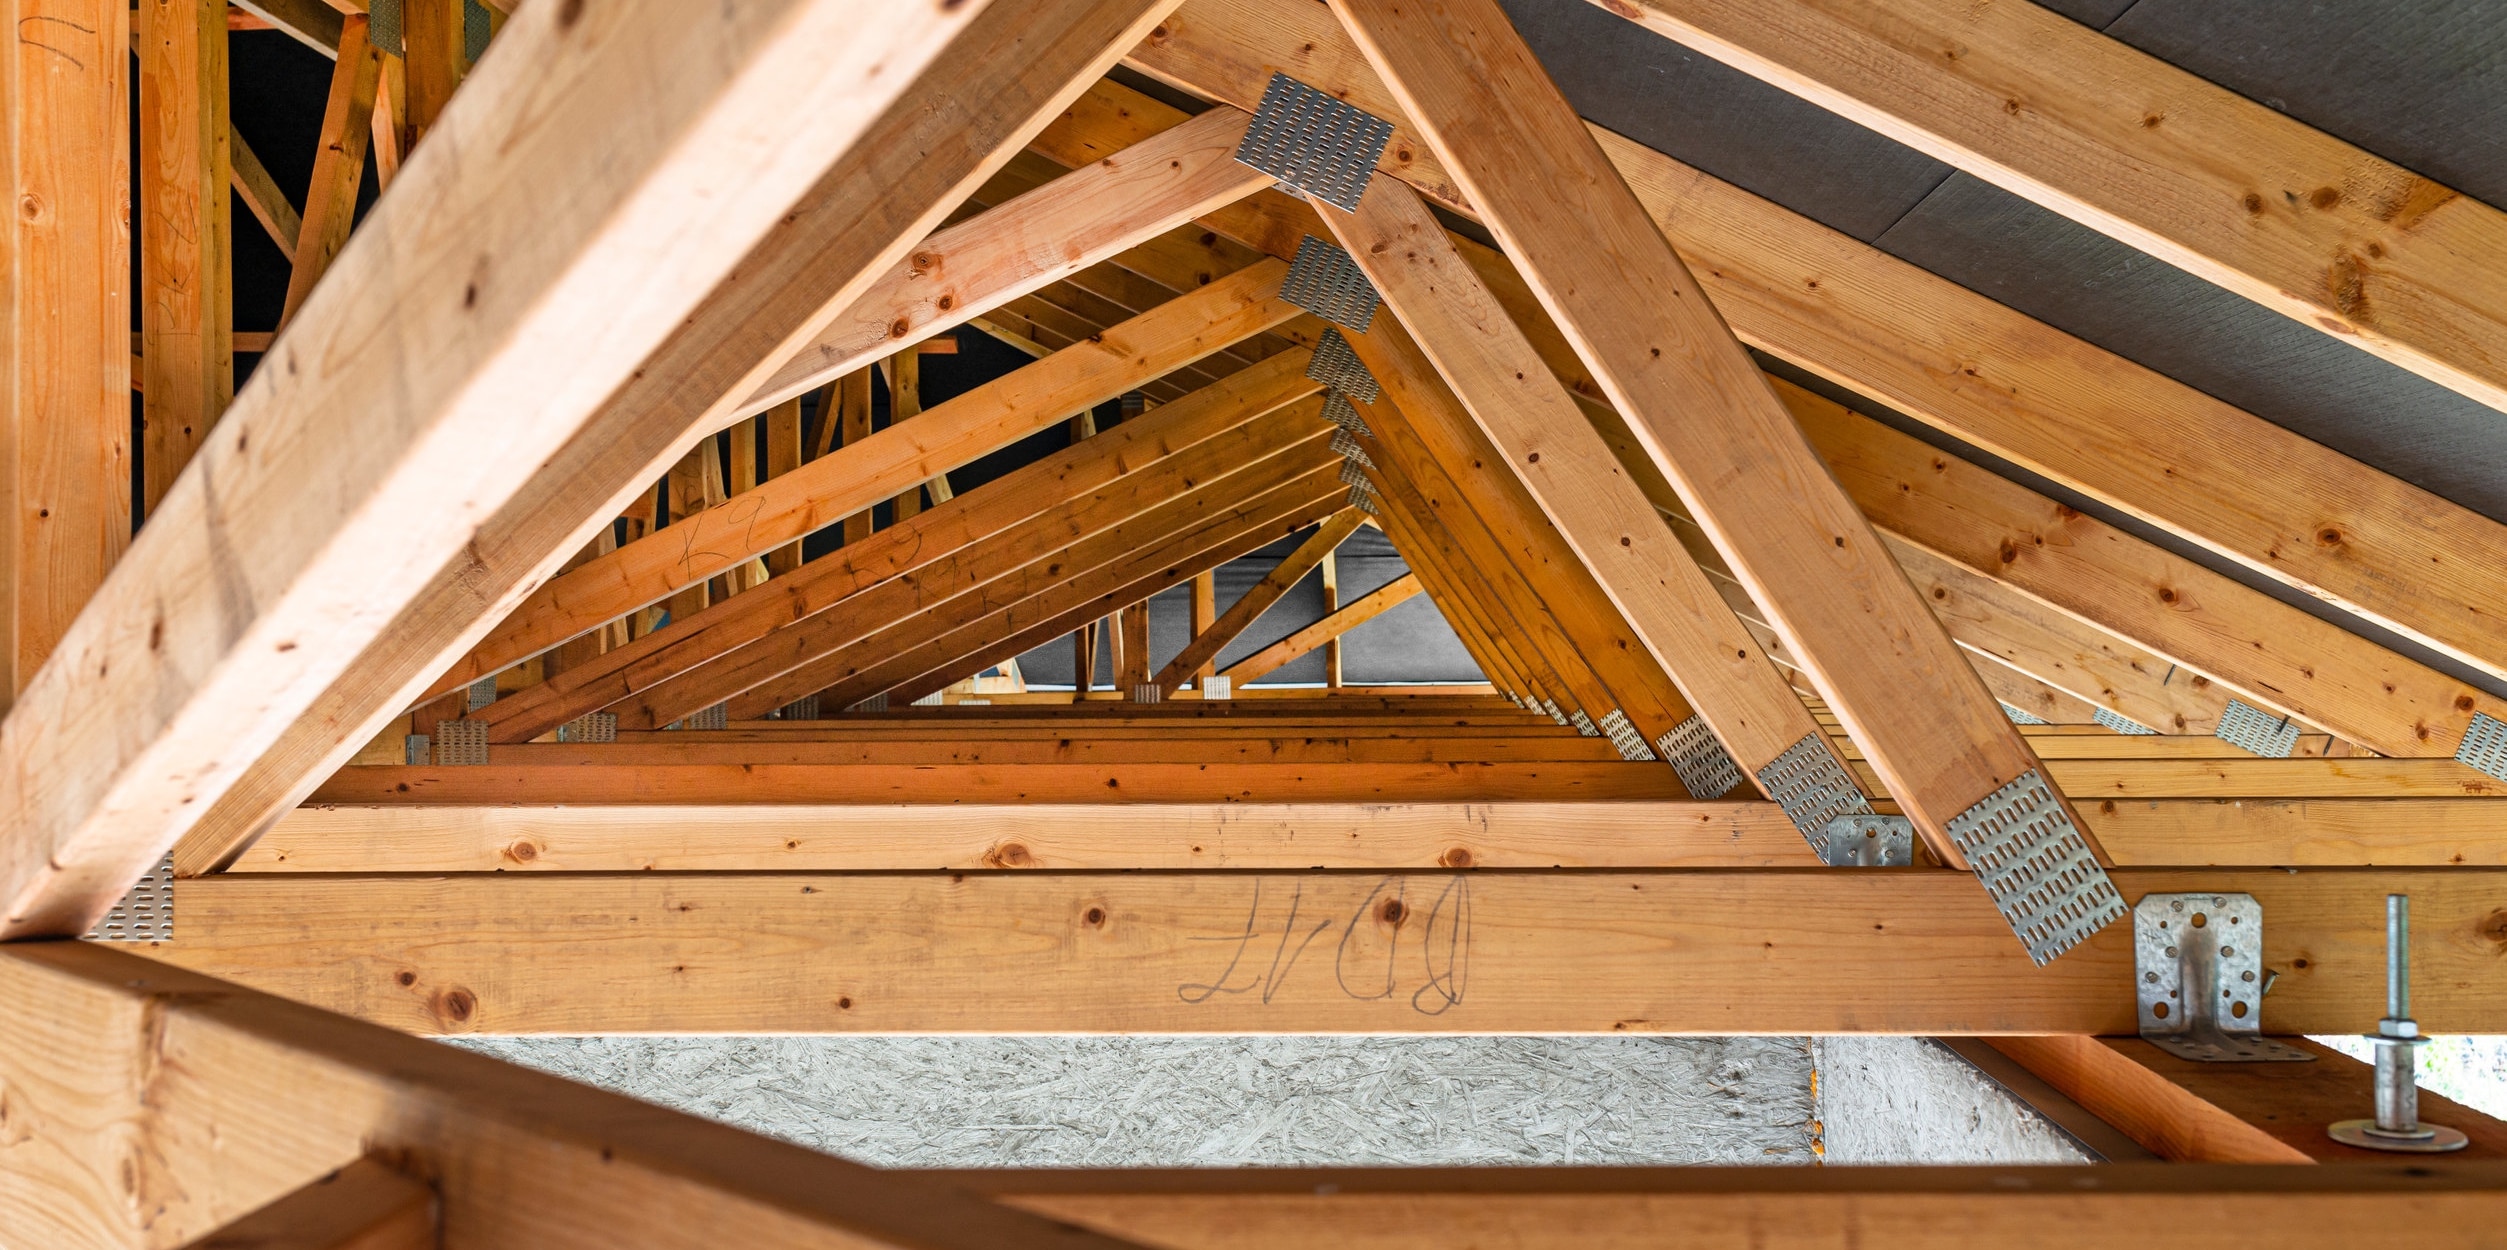 Trusses in an attic